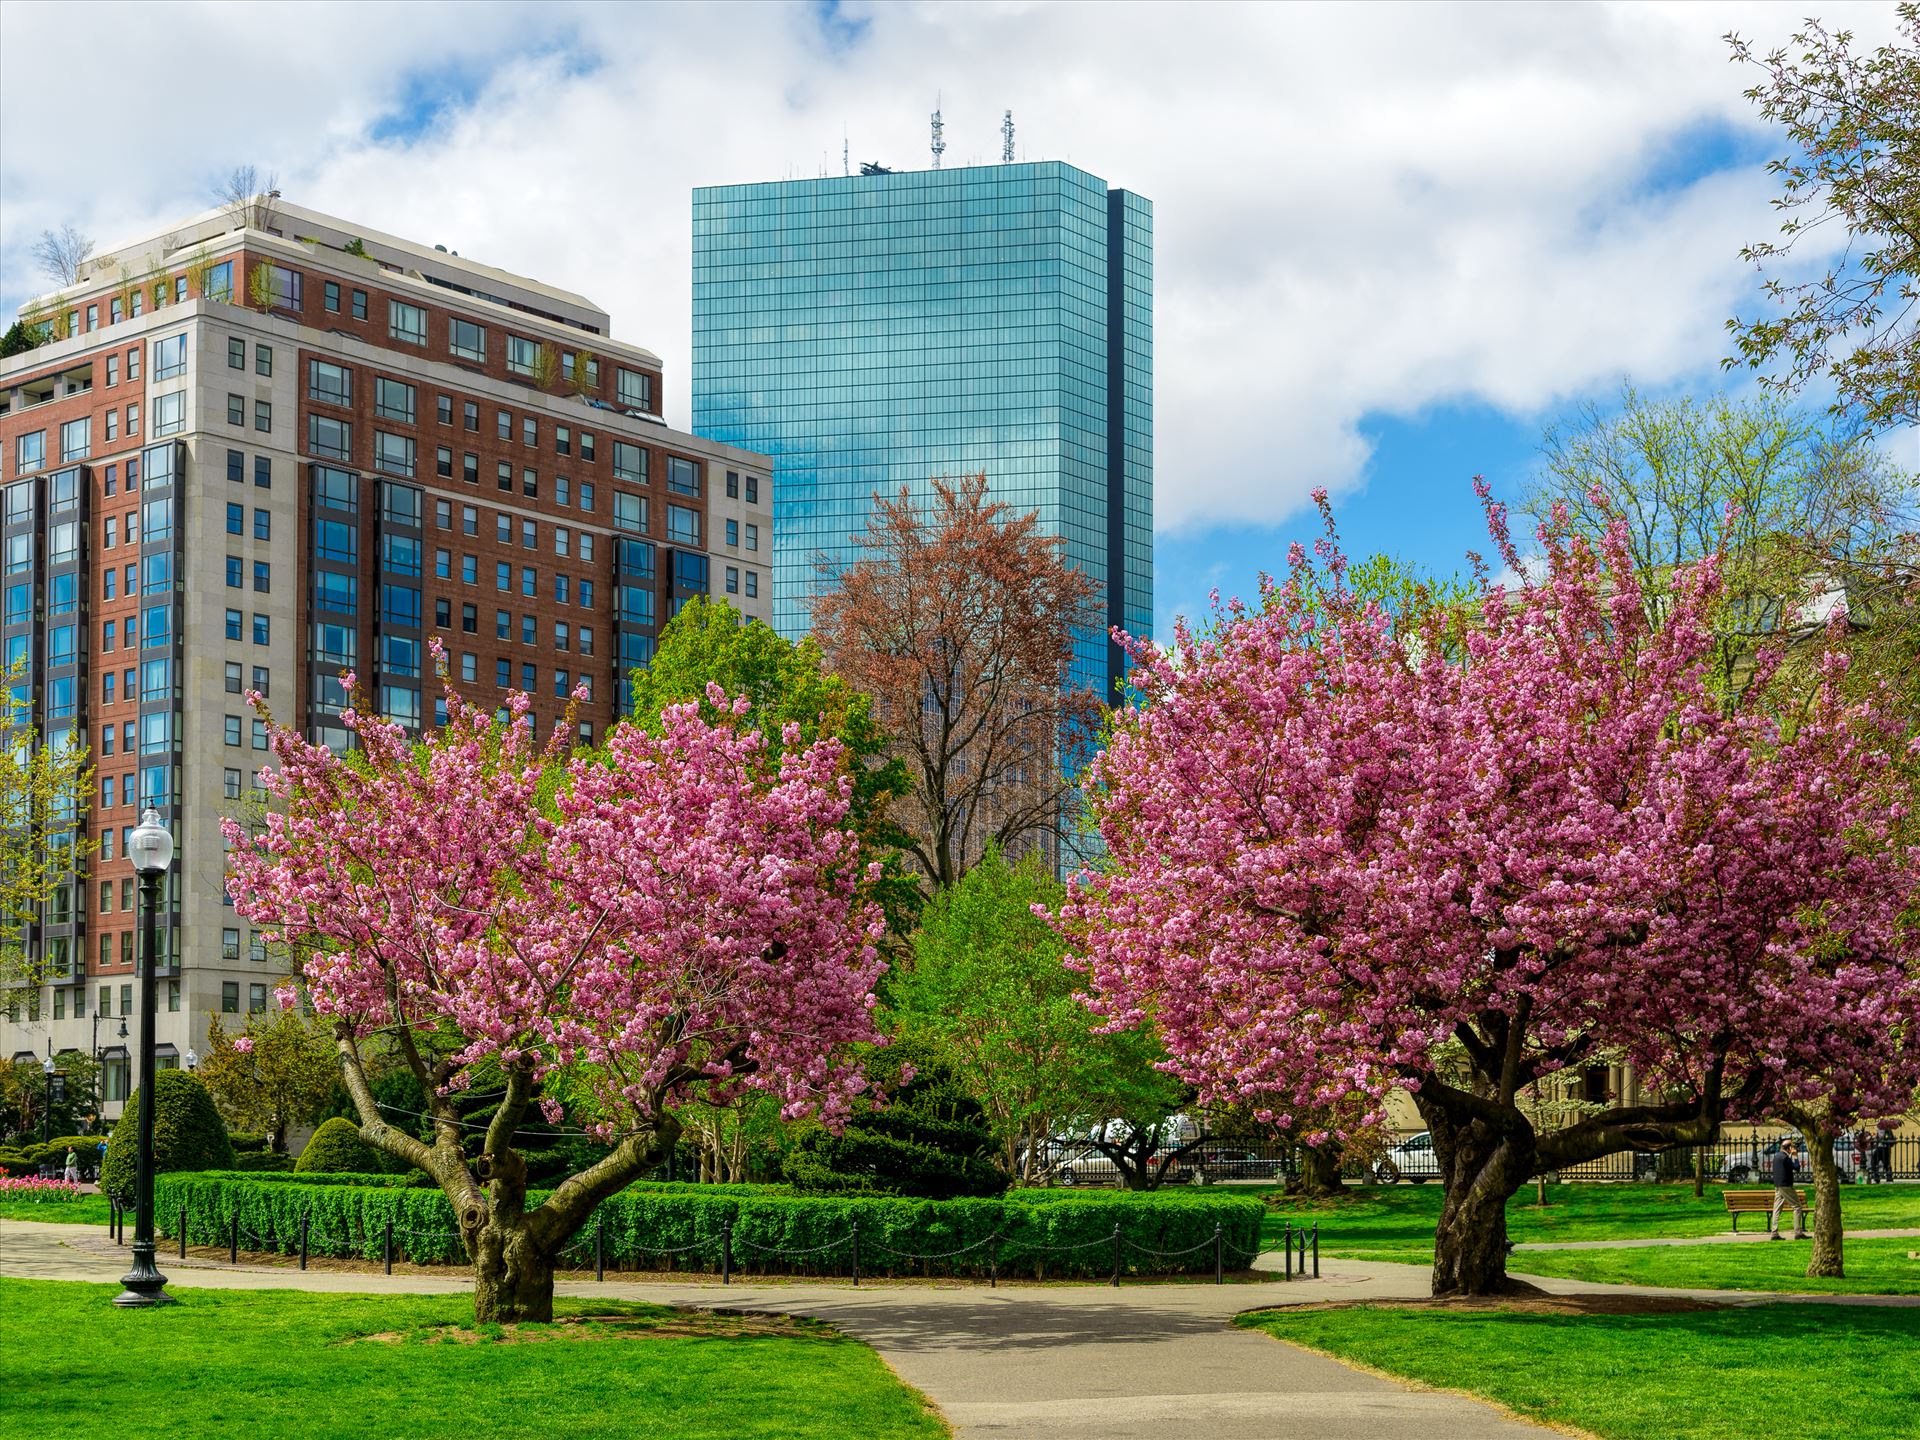 Trees show their beautiful spring color in the historic Boston Public Garden in Boston, Massachusetts -  by New England Photography